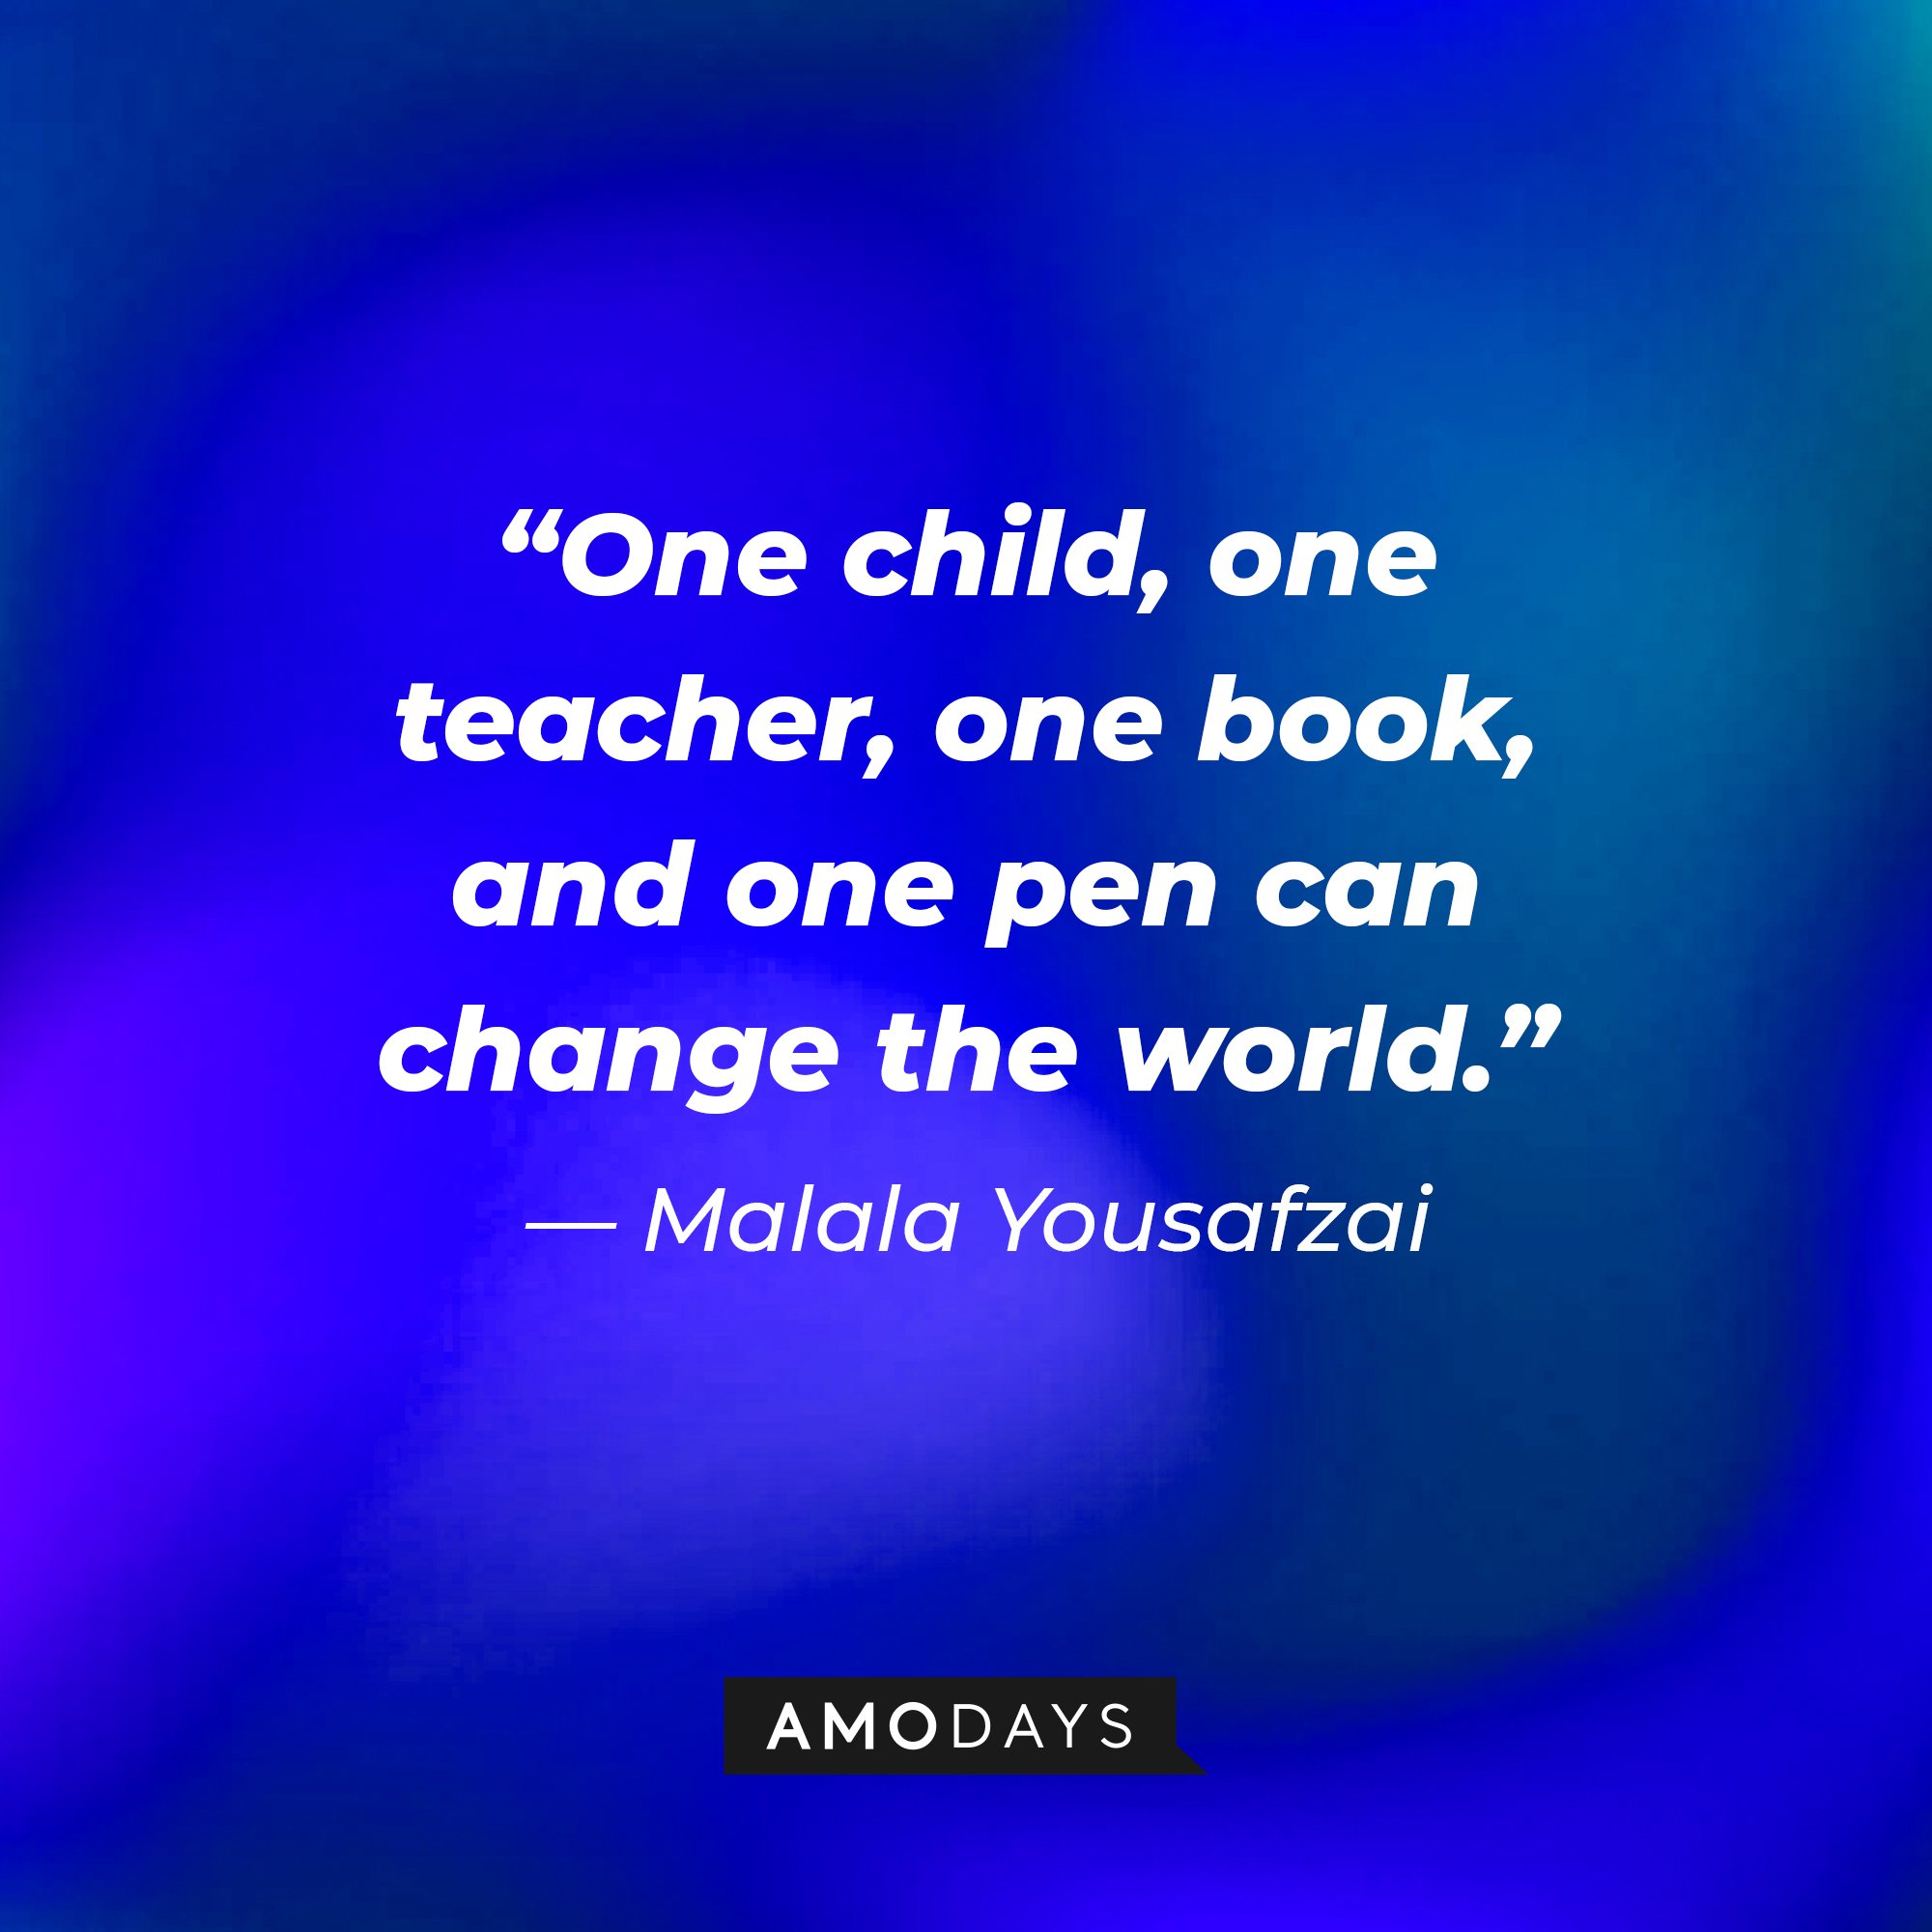 Malala Yousafzai’s quote: "One child, one teacher, one book, and one pen can change the world.” | Image: AmoDays